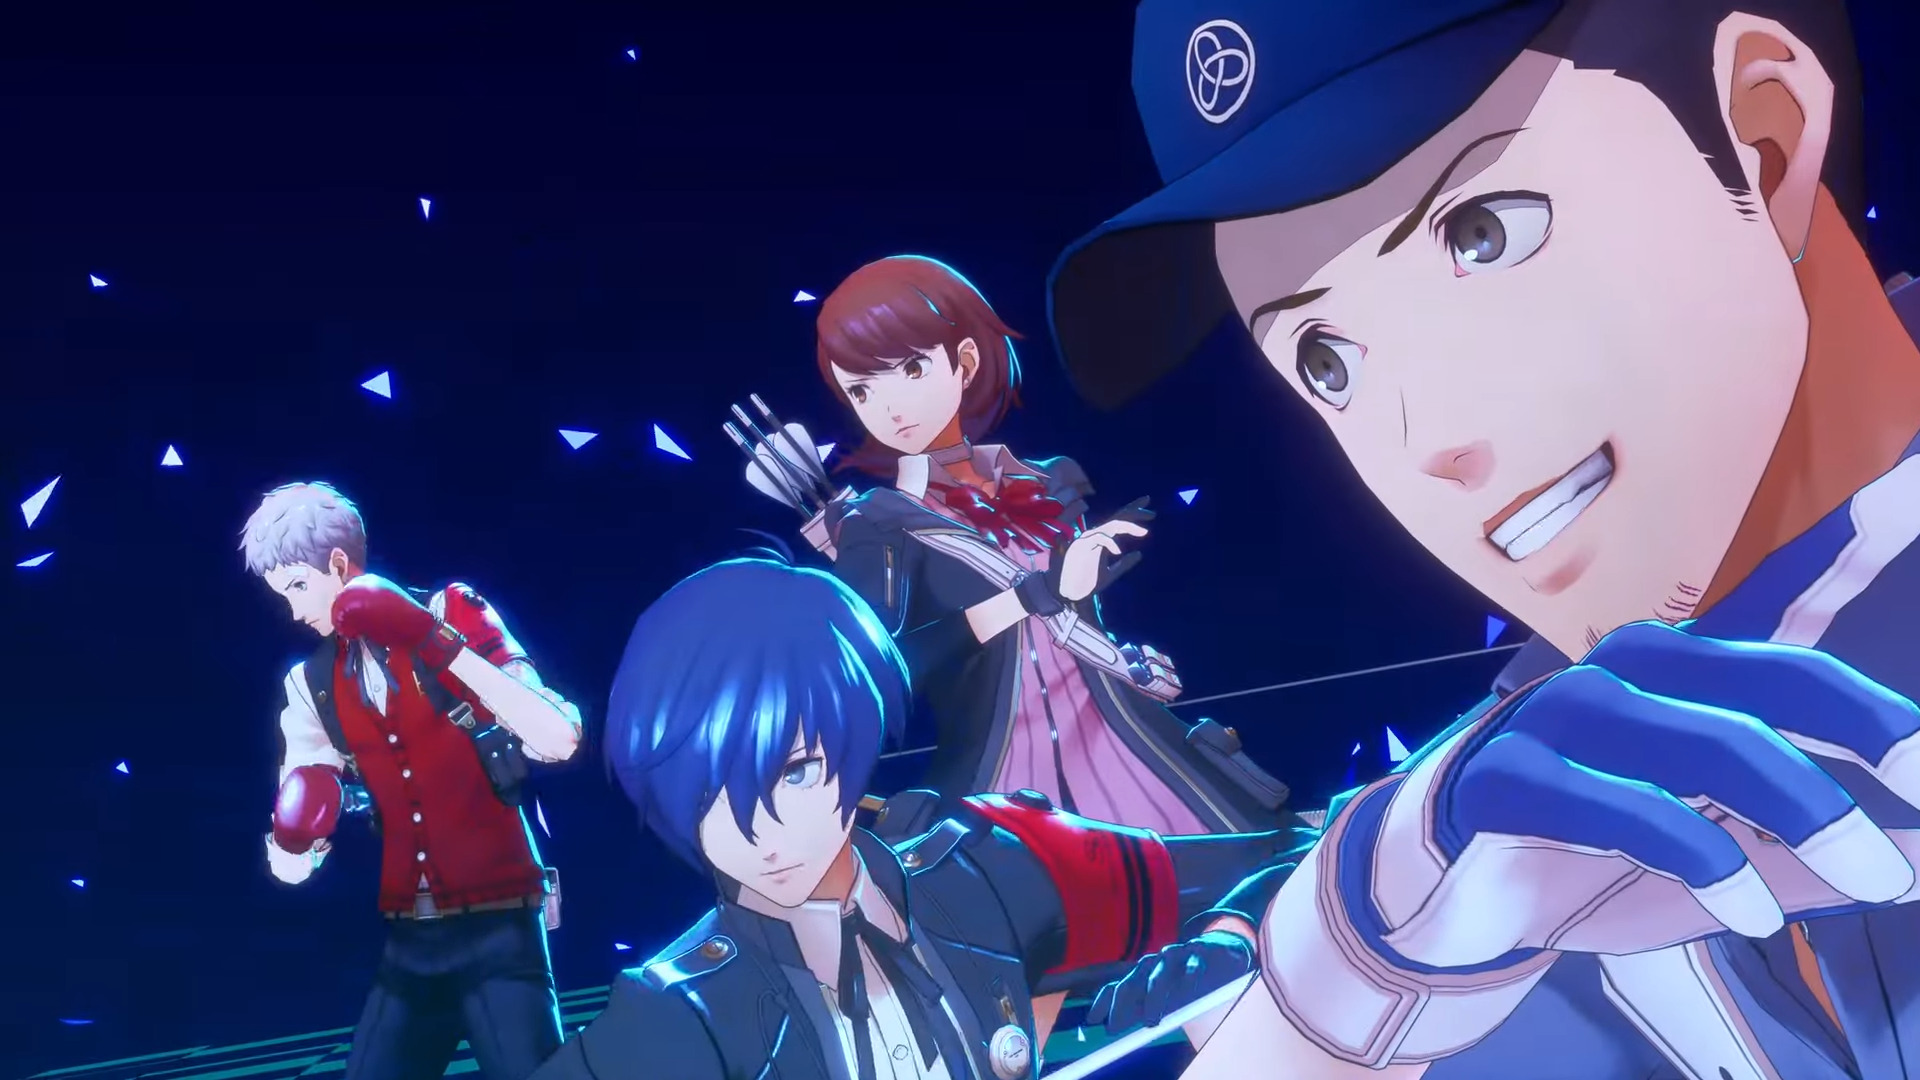 Persona 3 Reload’s Latest Trailer Showcases the Protagonist’s Everyday Life